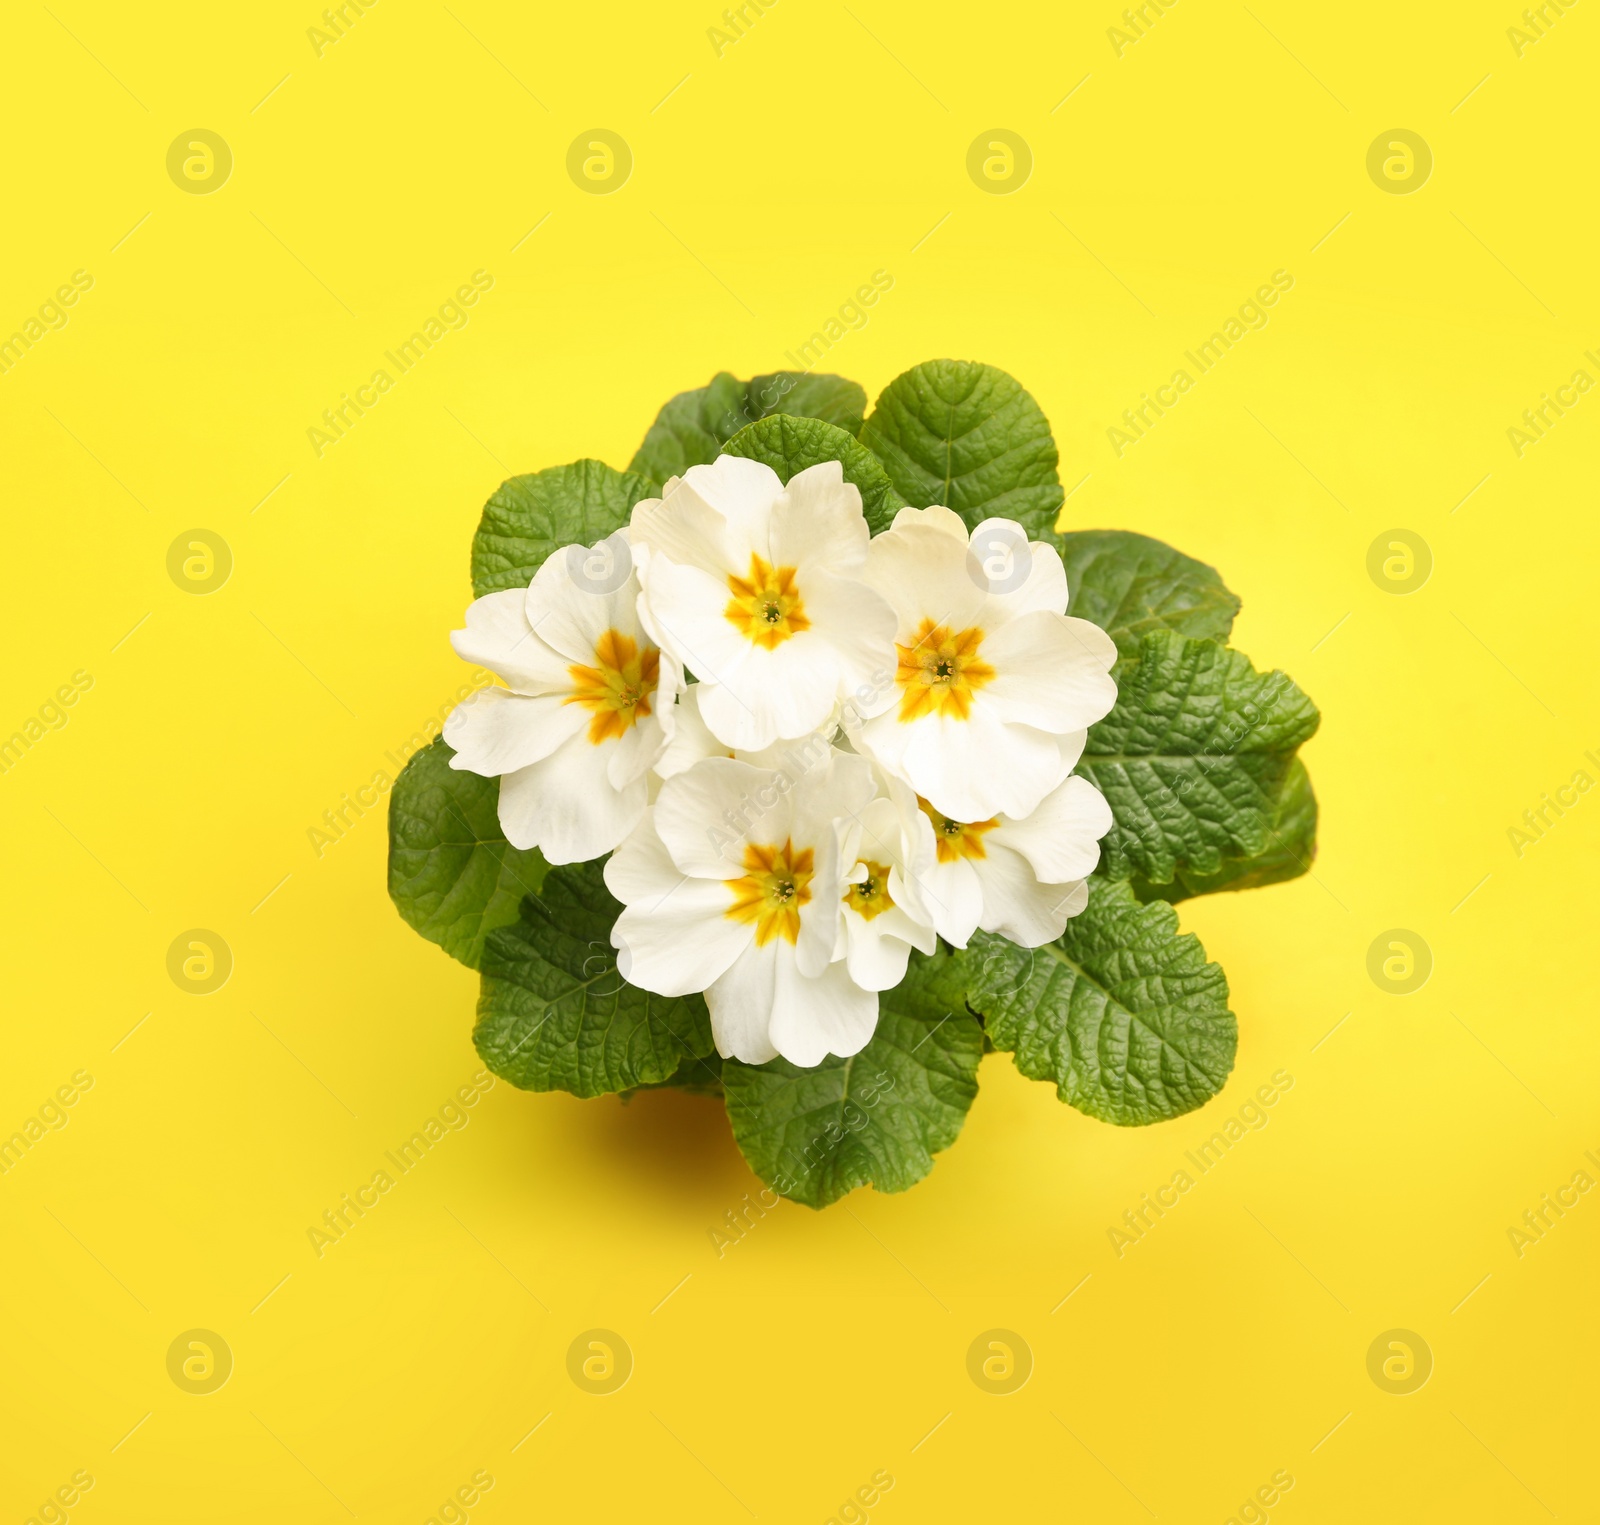 Photo of Beautiful primula (primrose) plant with white flowers on yellow background, top view. Spring blossom